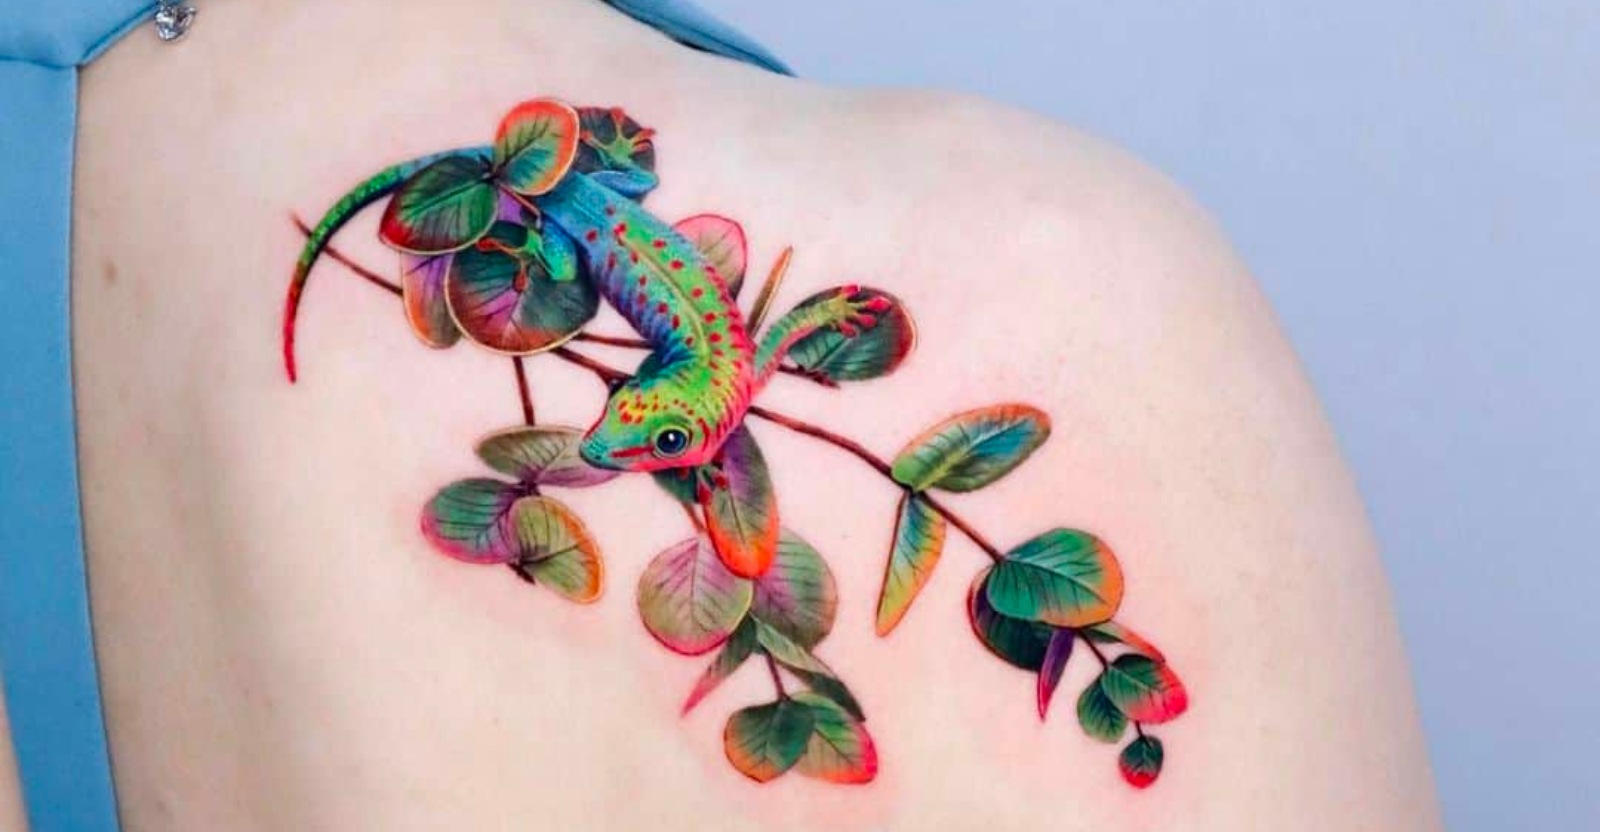 Download Body art comes alive with this colorful tattoo. | Wallpapers.com